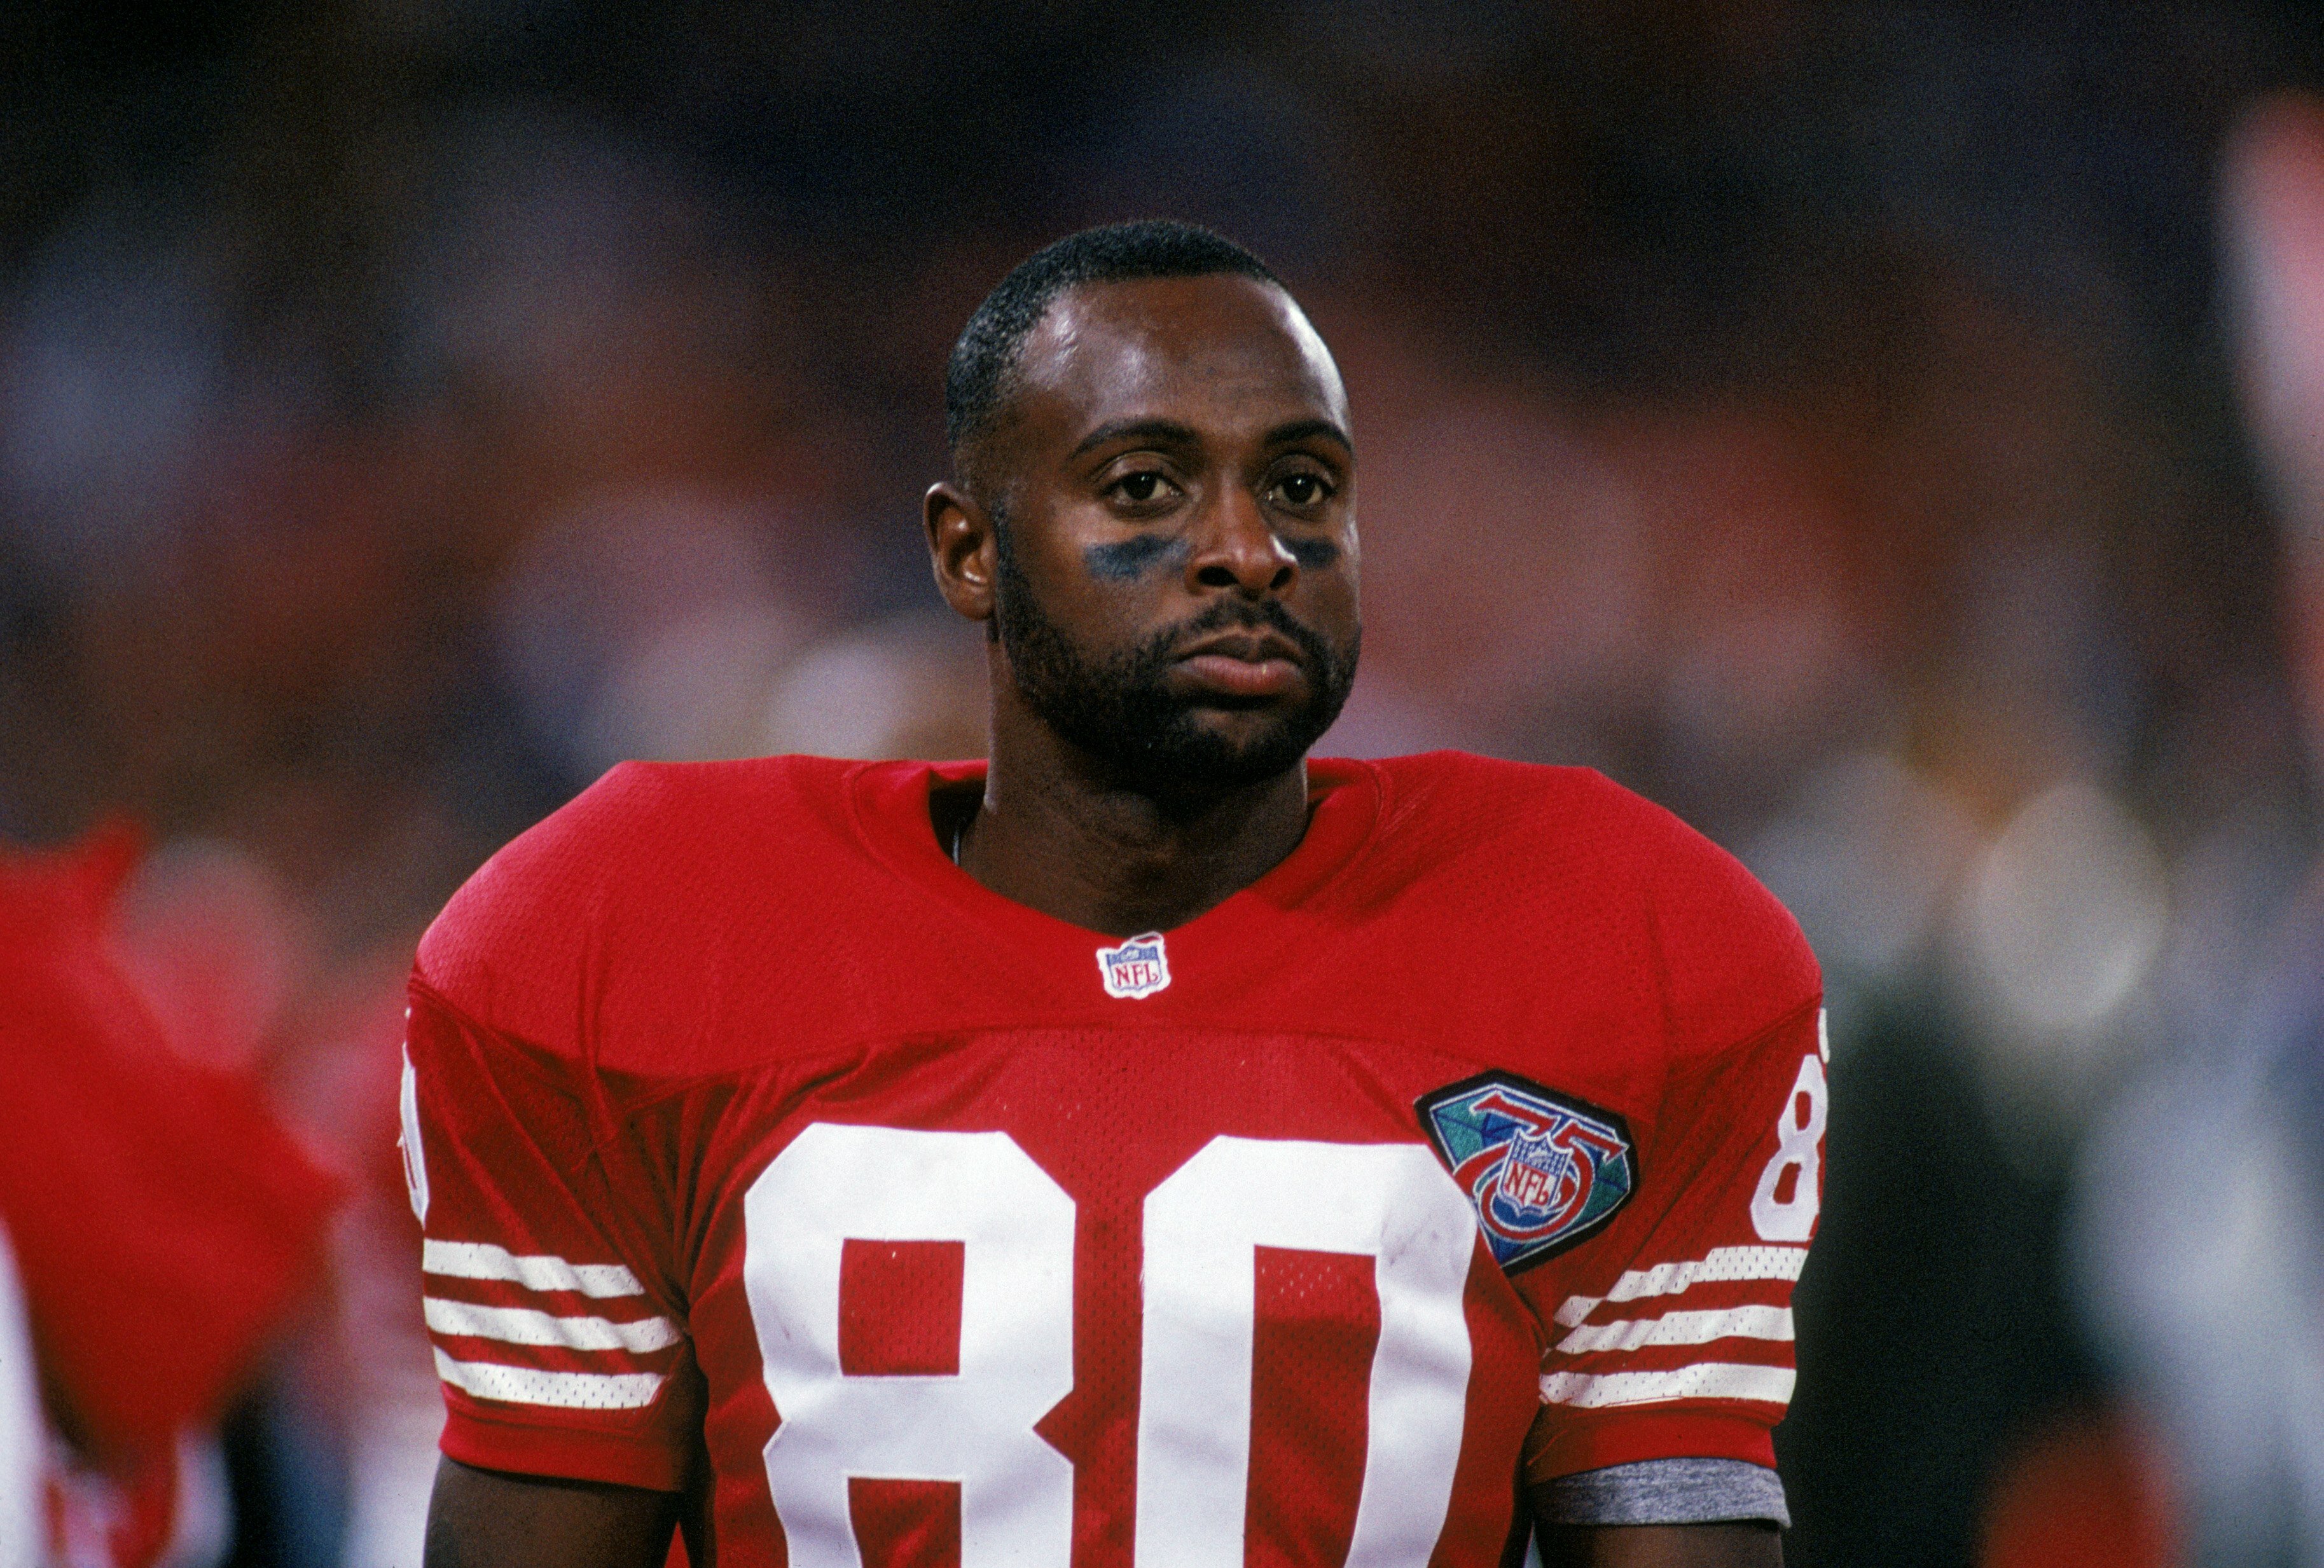 Jerry Rice Participated in Blue-Gray Classic